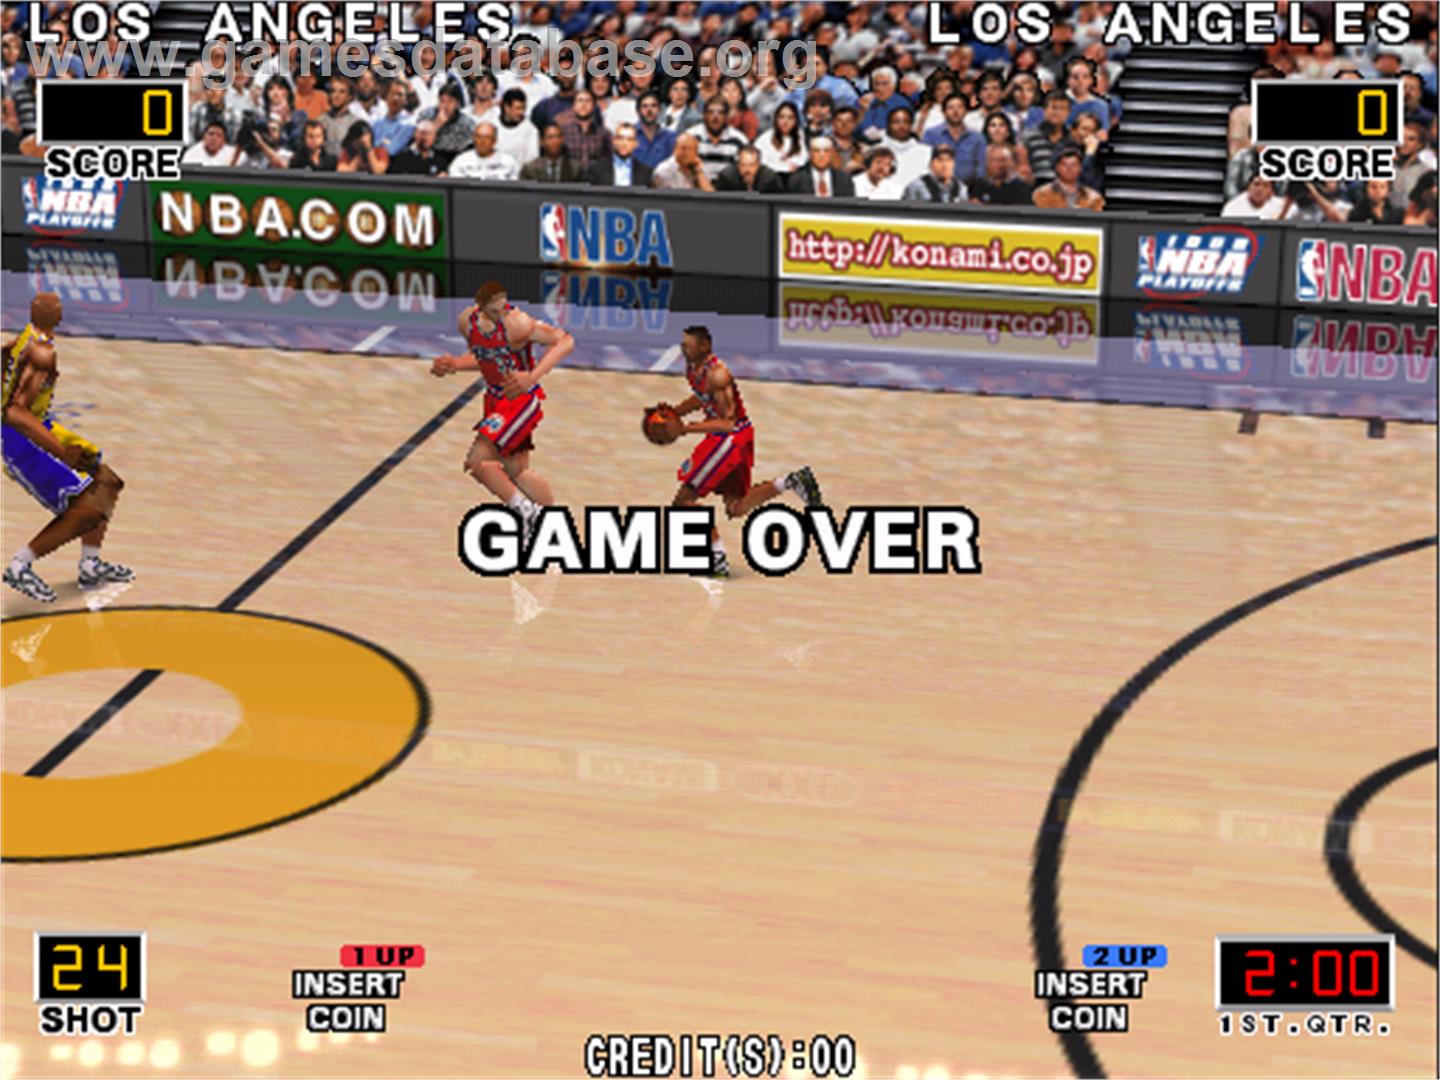 NBA Play By Play - Arcade - Artwork - Game Over Screen